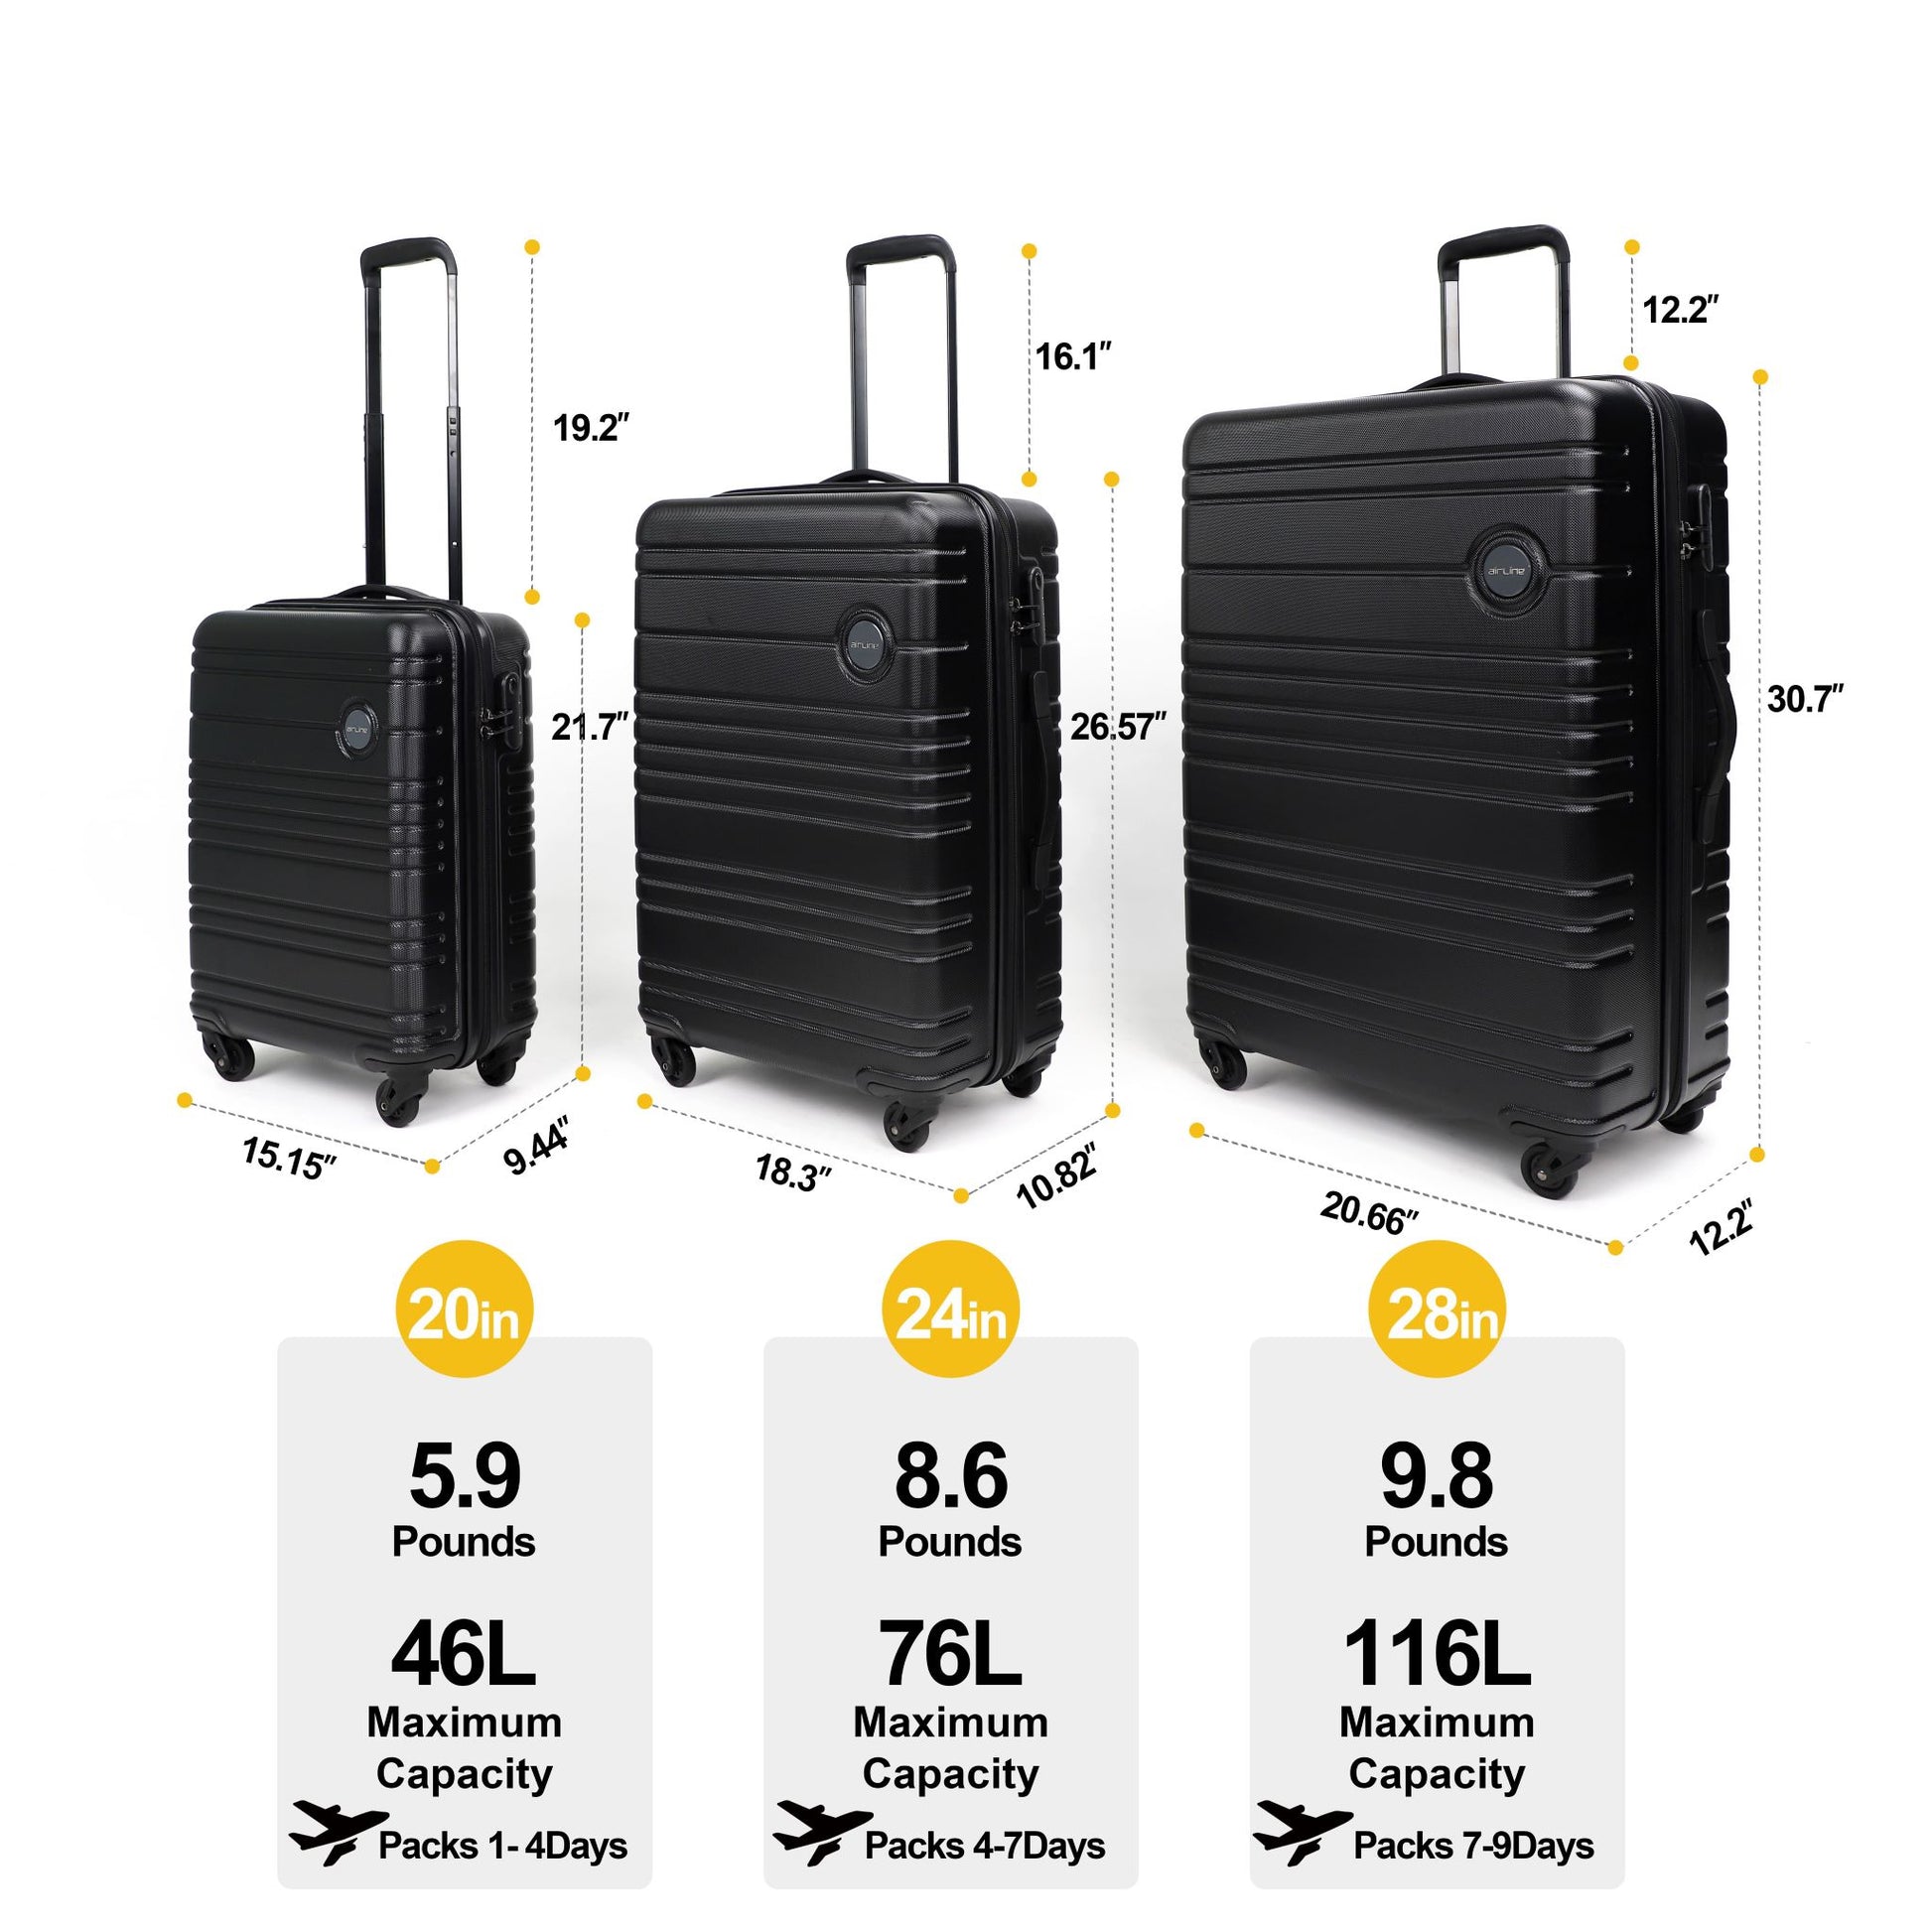 Airline_Luggage_Sets_3pieces_Black_Size_N12721001